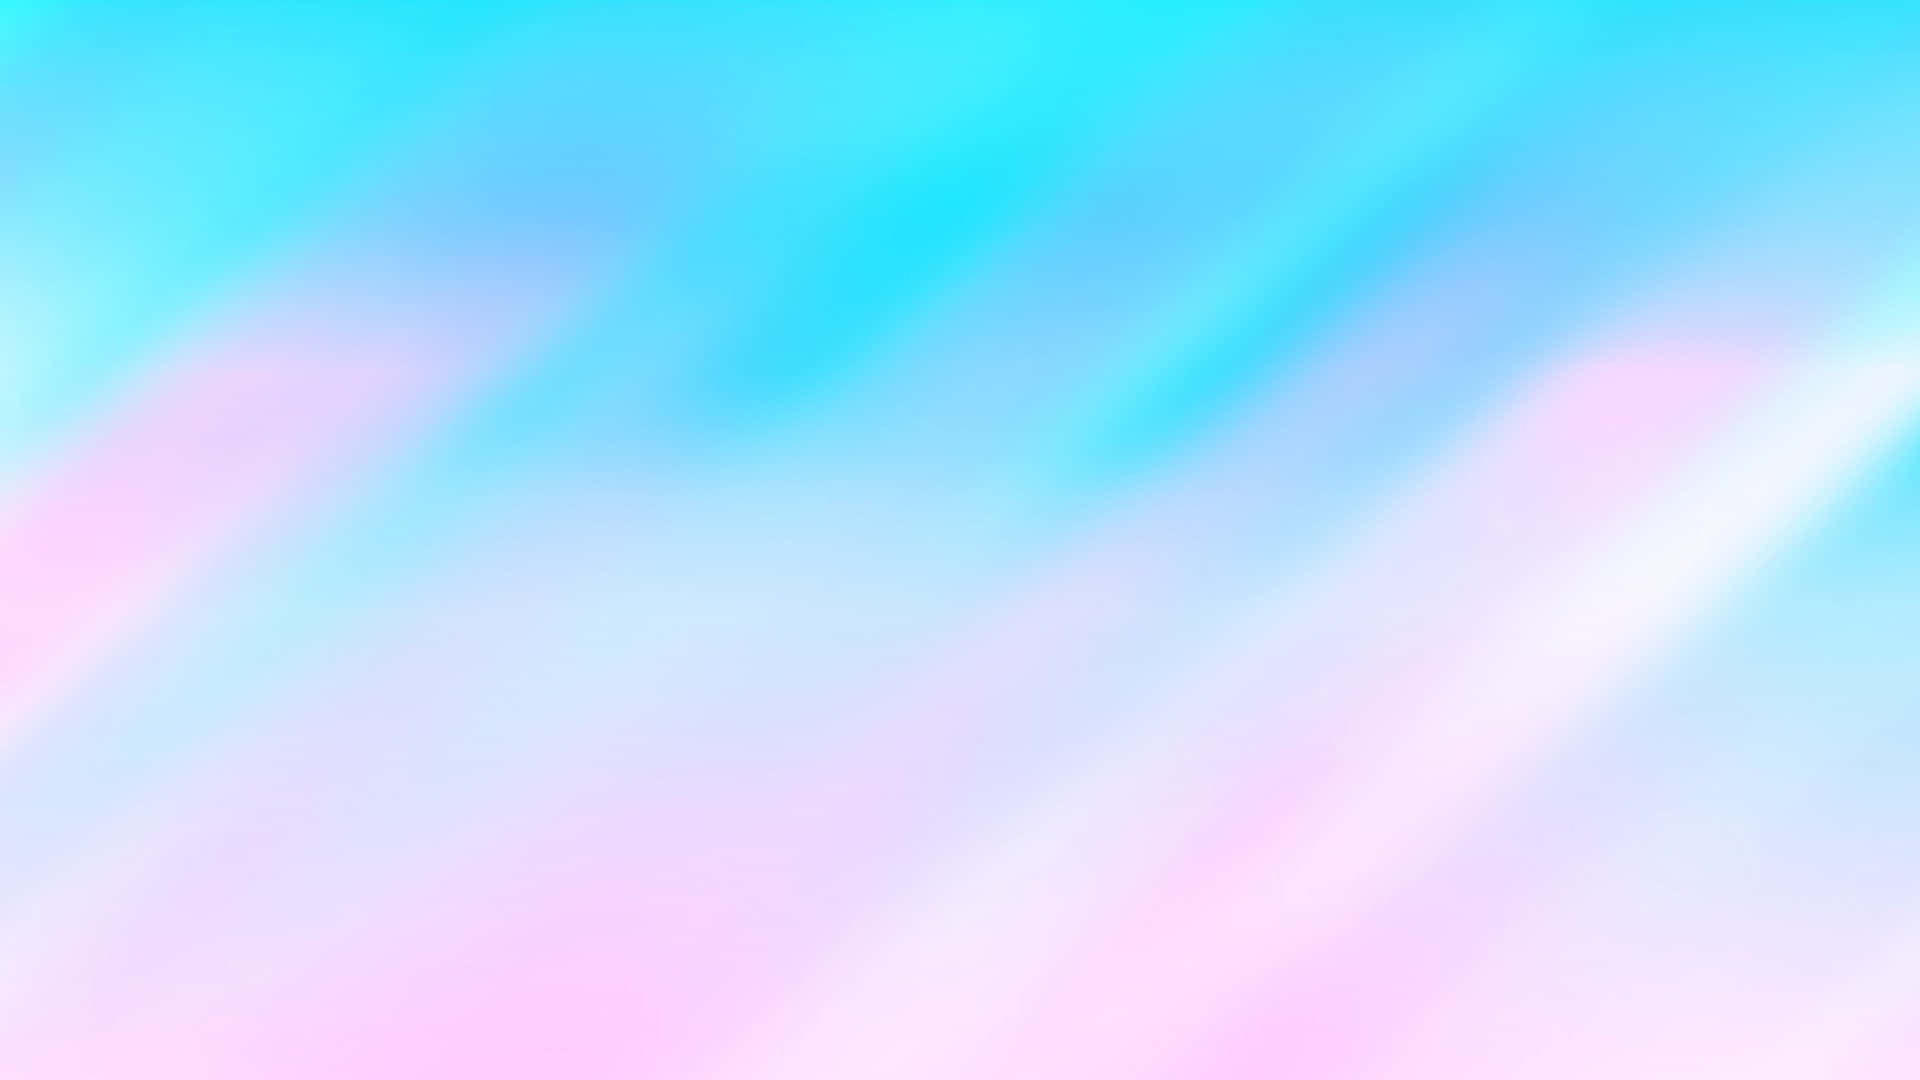 200+] Pastel Cute Background s 